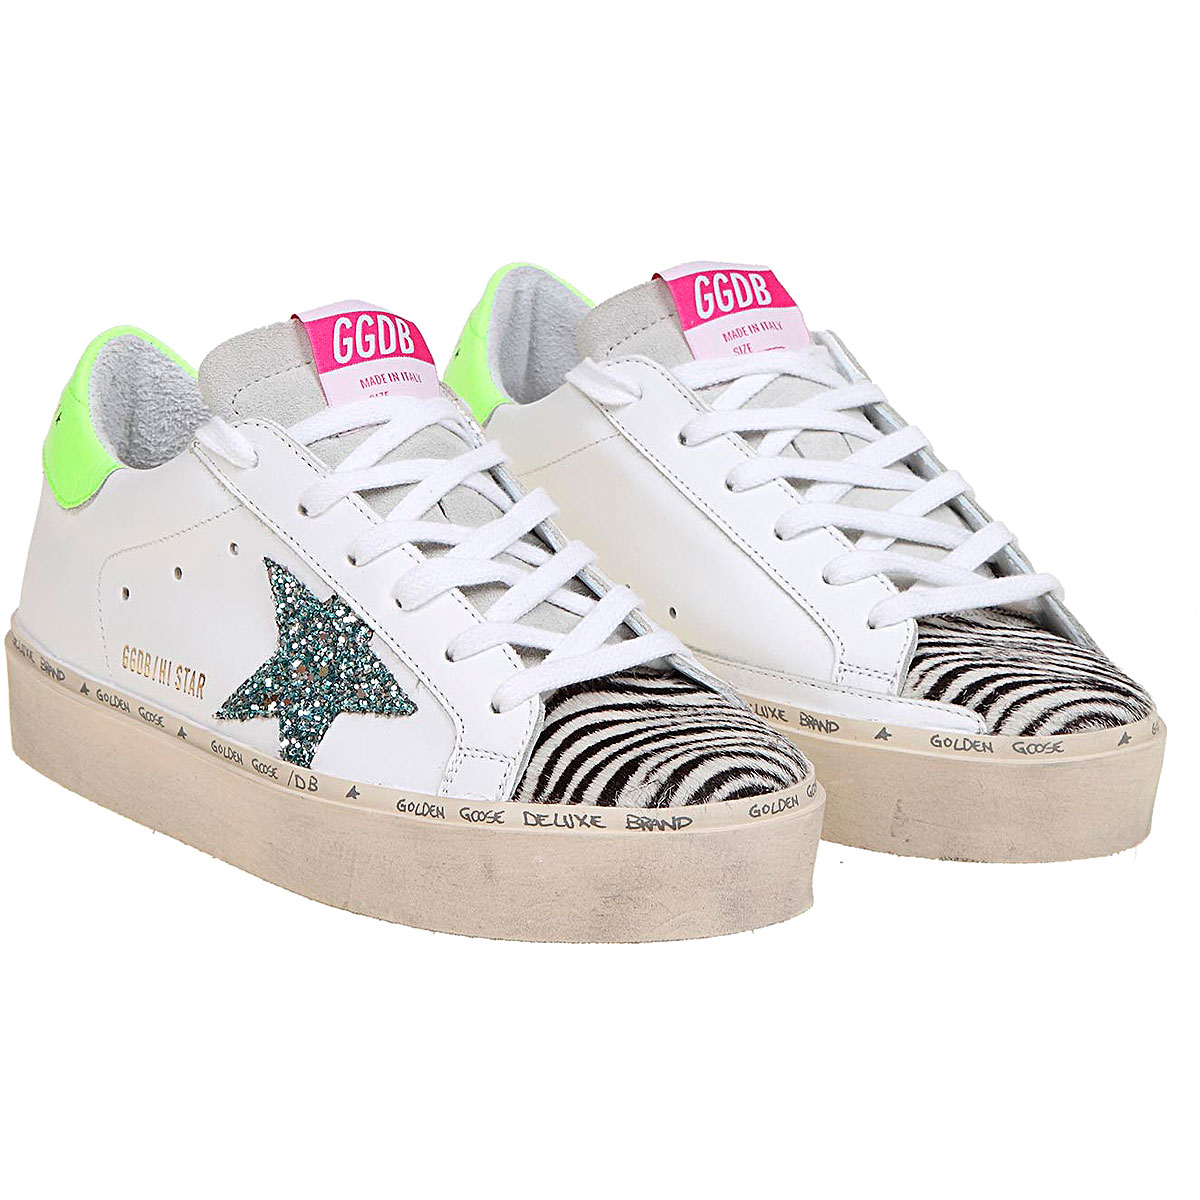 Womens Shoes Golden Goose, Style code: gwf00118-f000231-80247